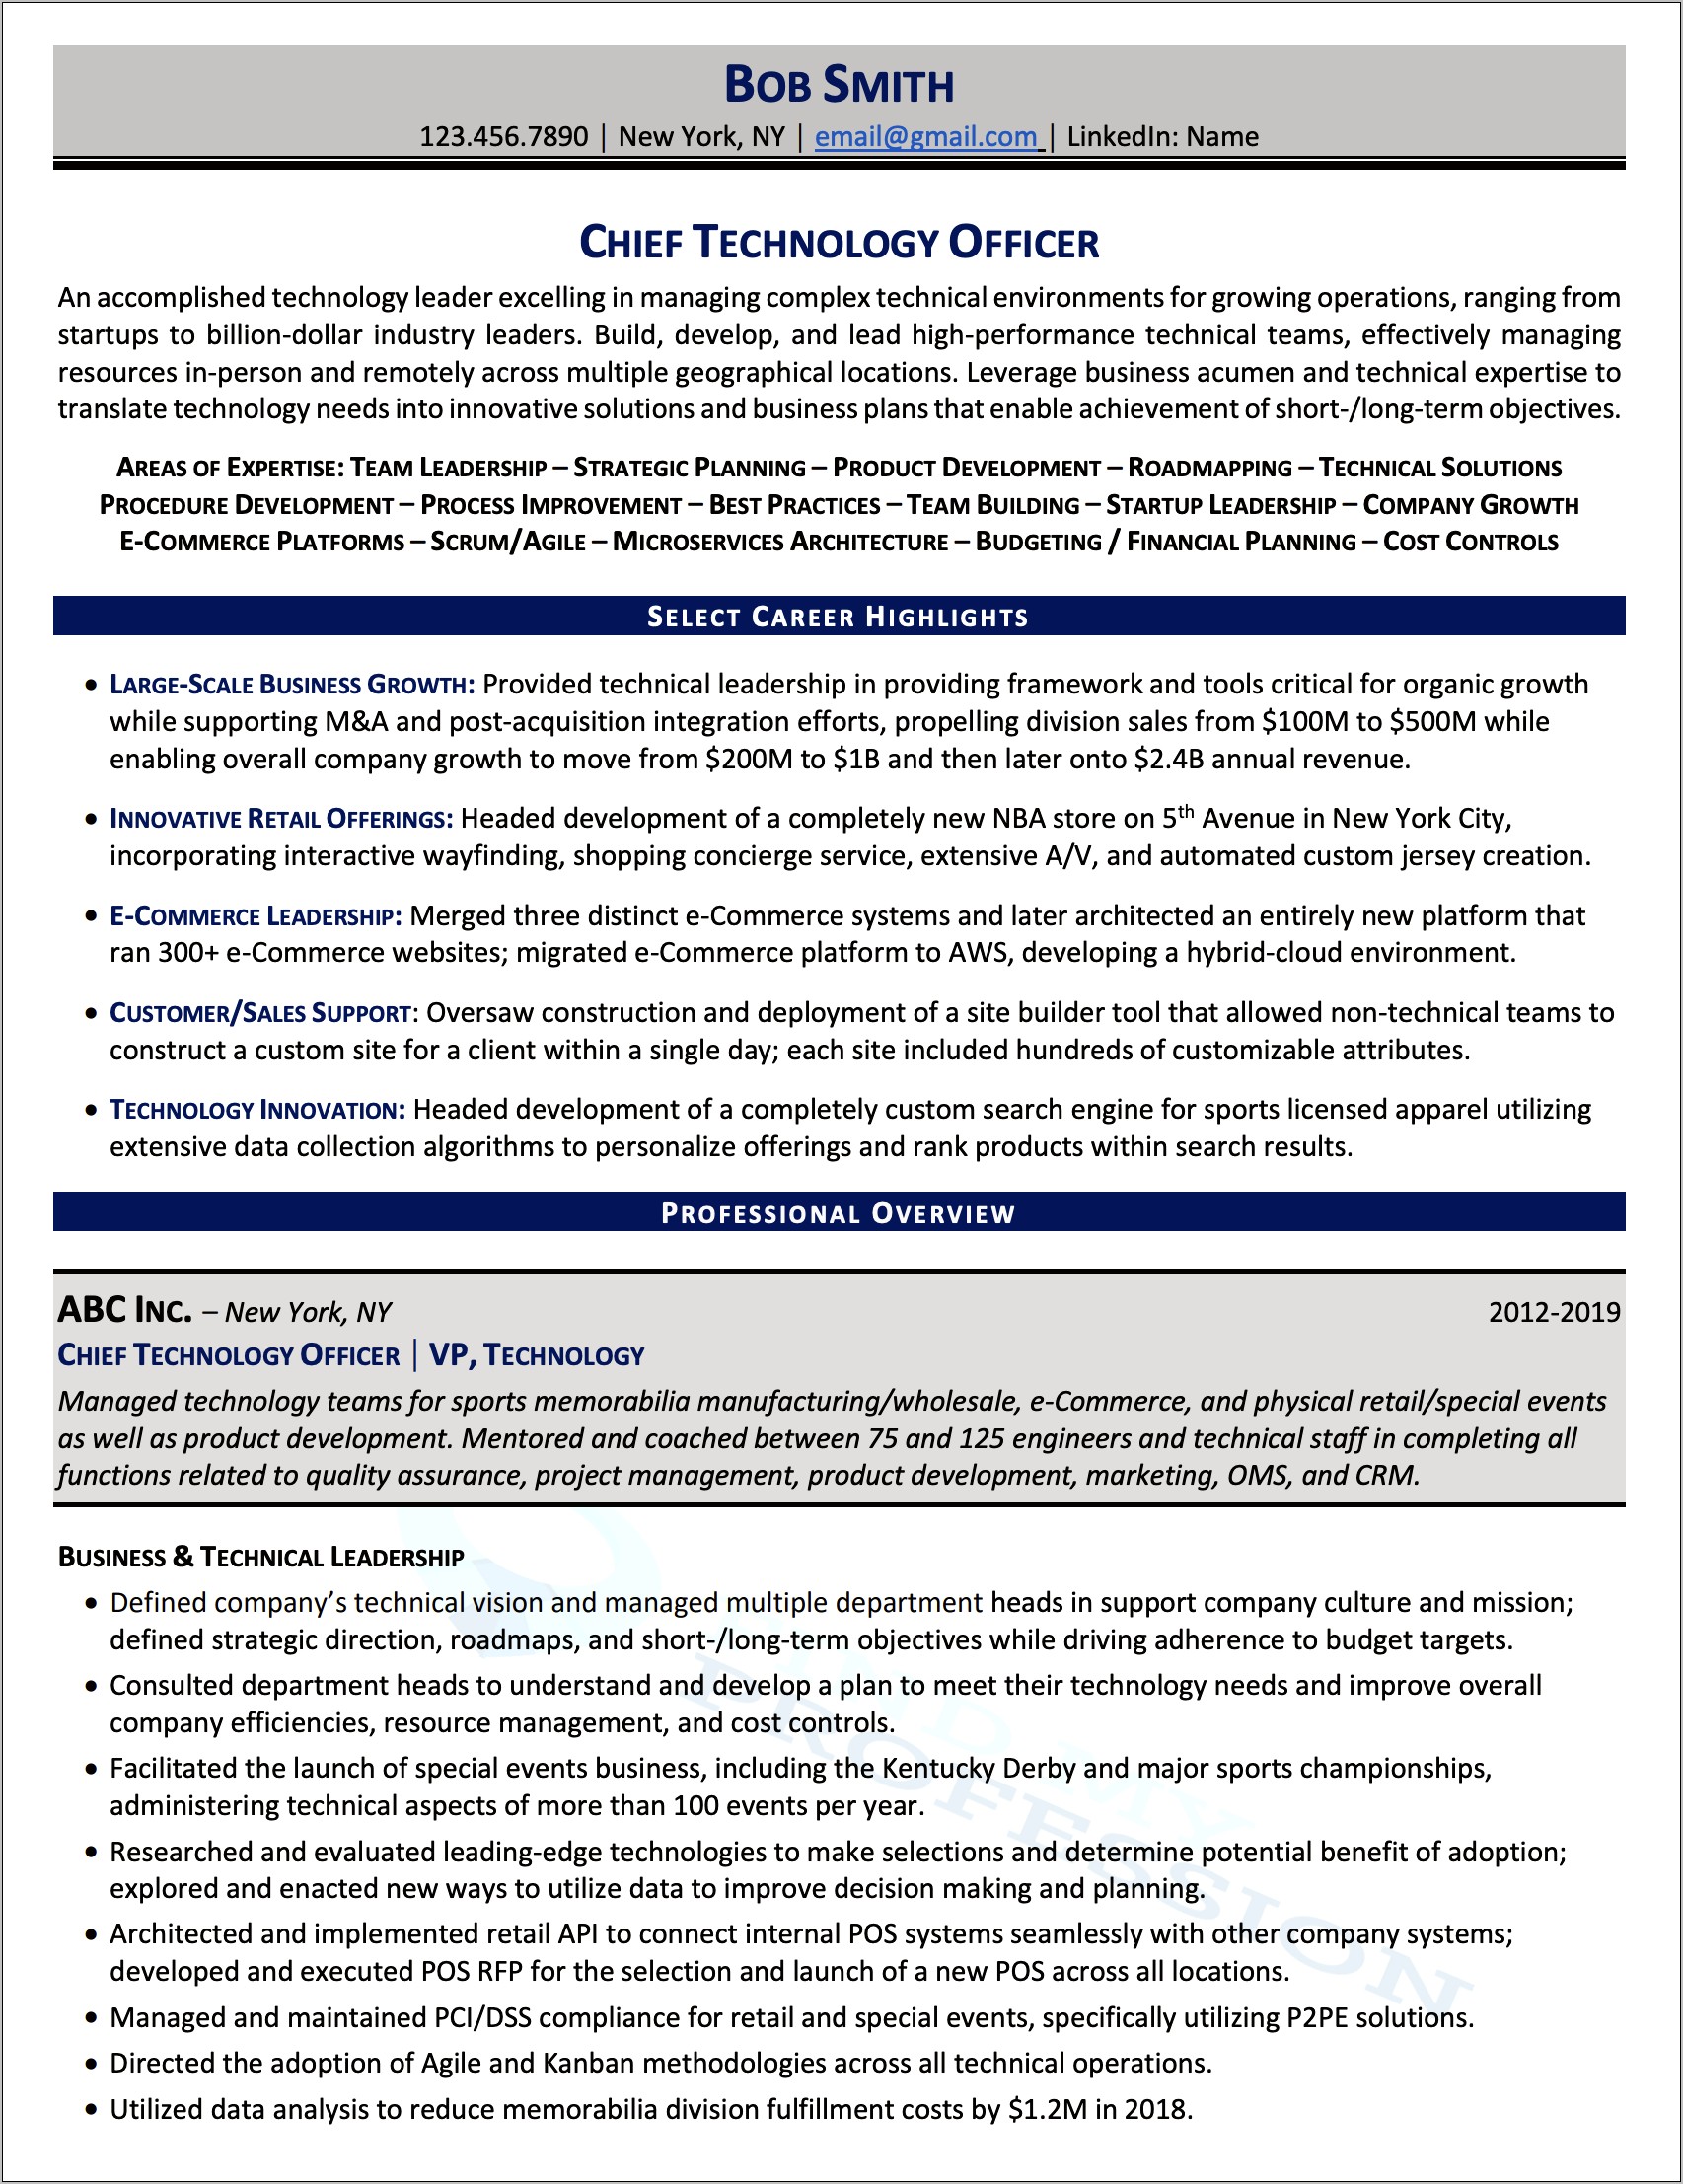 Site Acquisition Manager For Telecom Resume